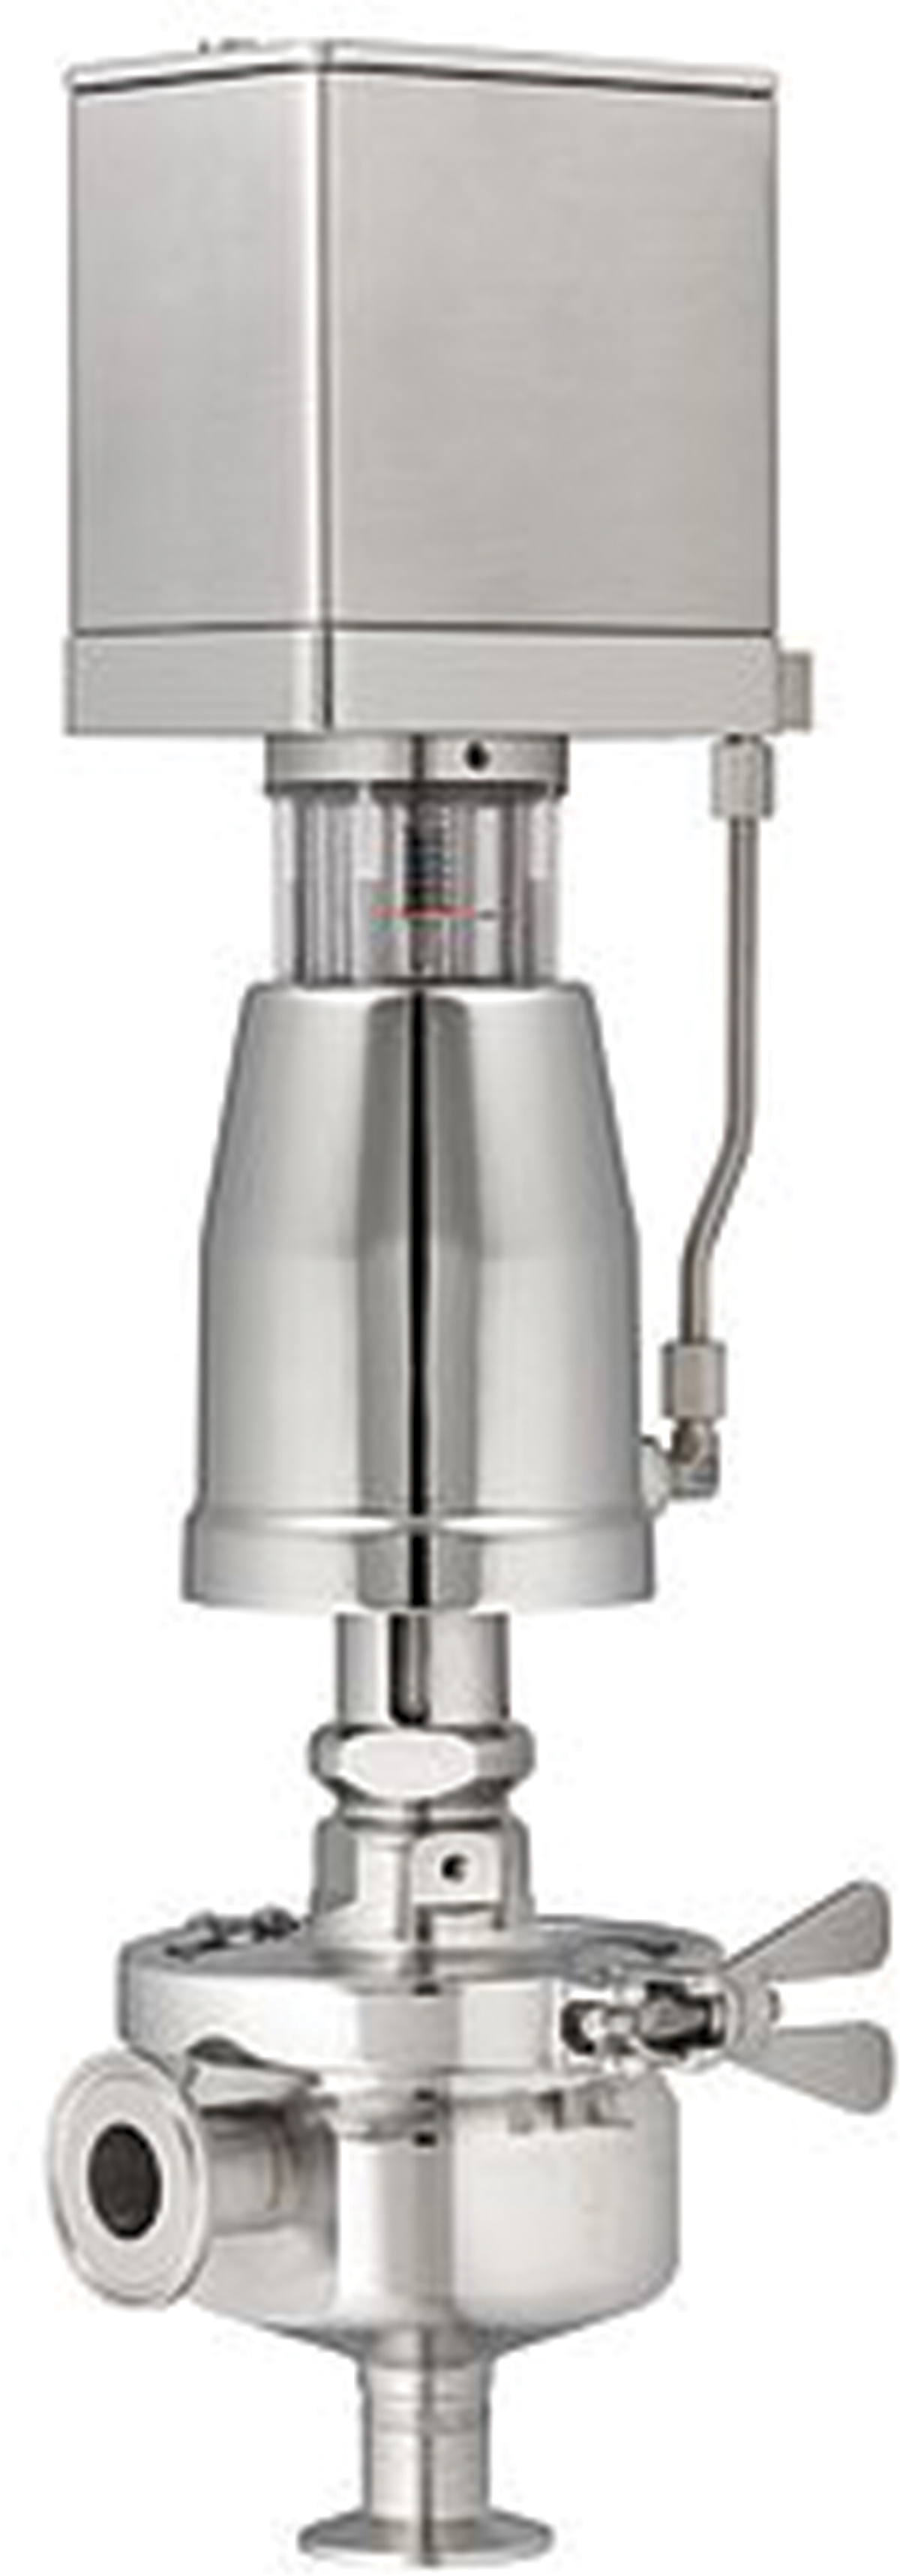 Versatile Right-Angle Valves Are Suitable for Sanitary Applications